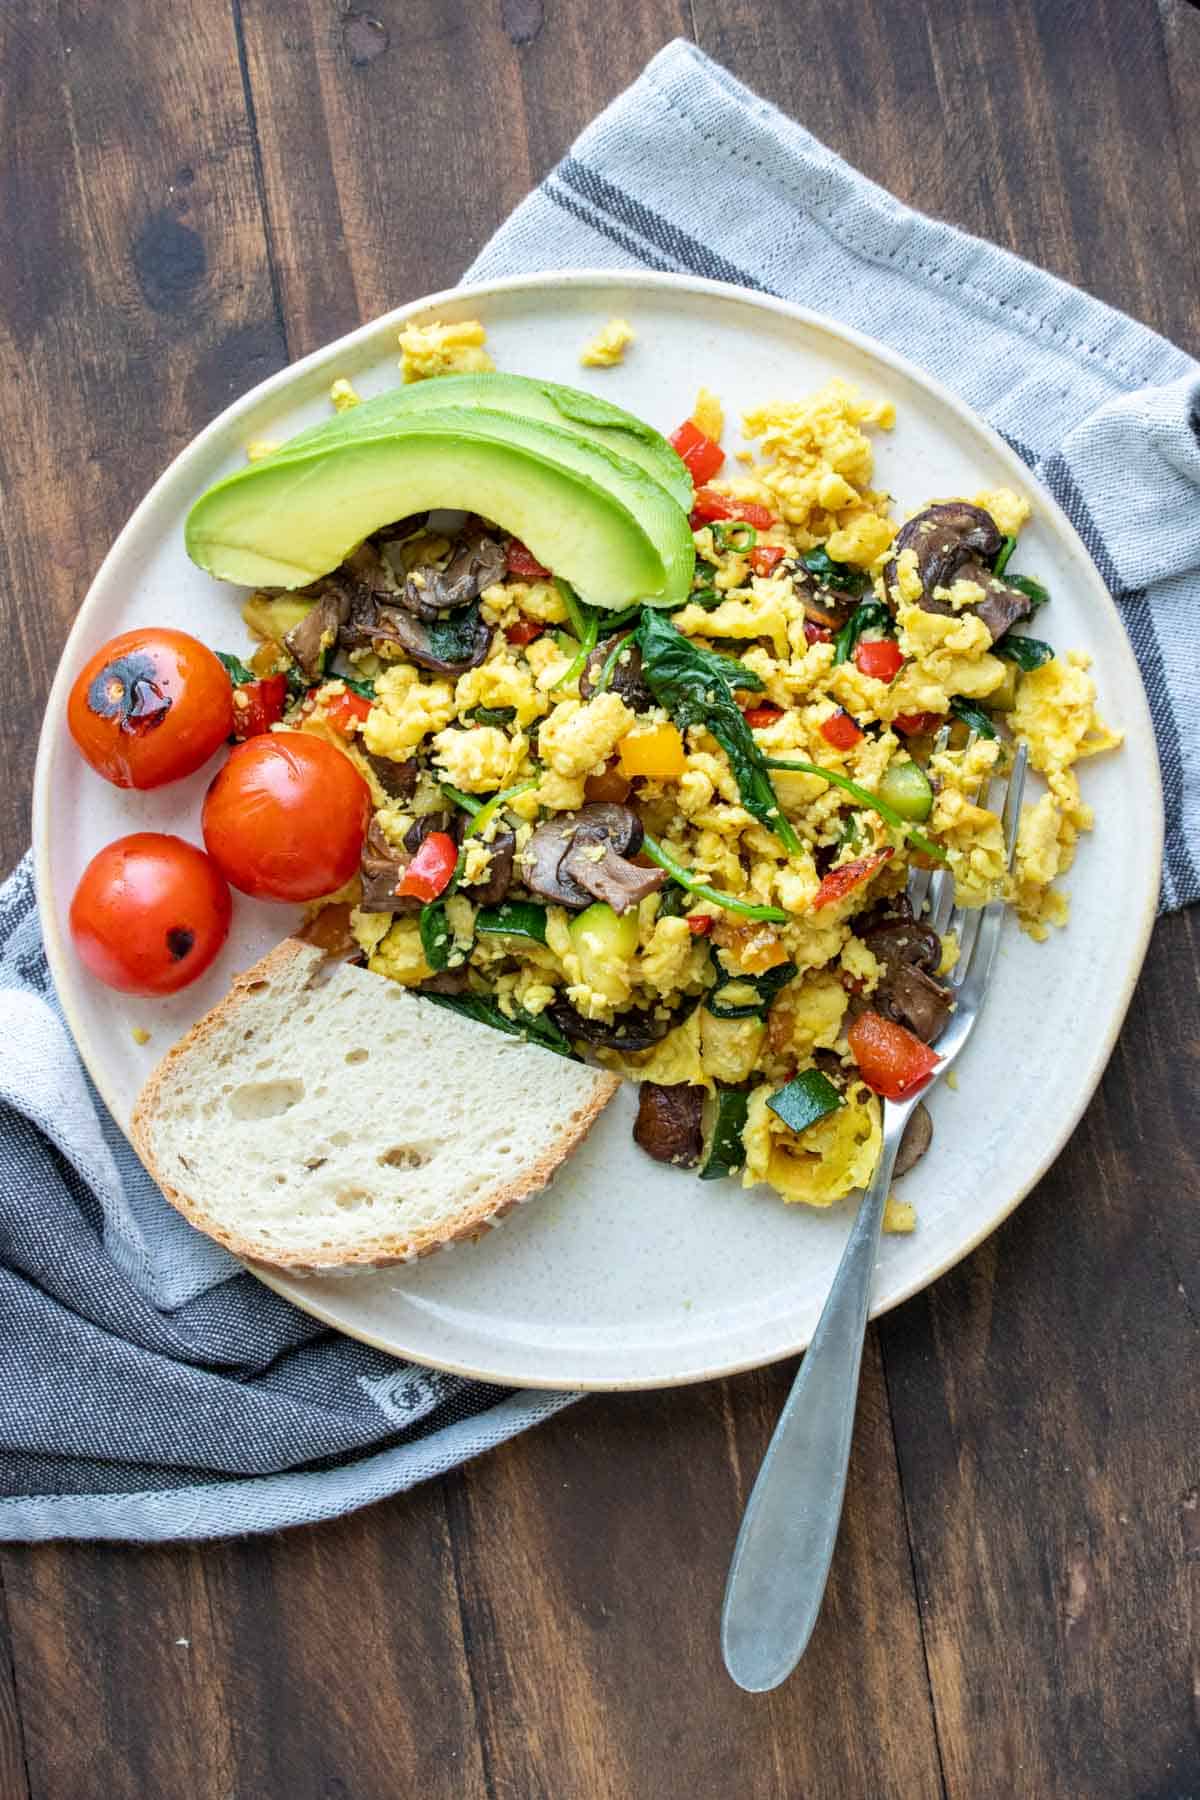 Grey plate with scrambled eggs mixed with veggies, slice of bread, avocado slices and cherry tomatoes